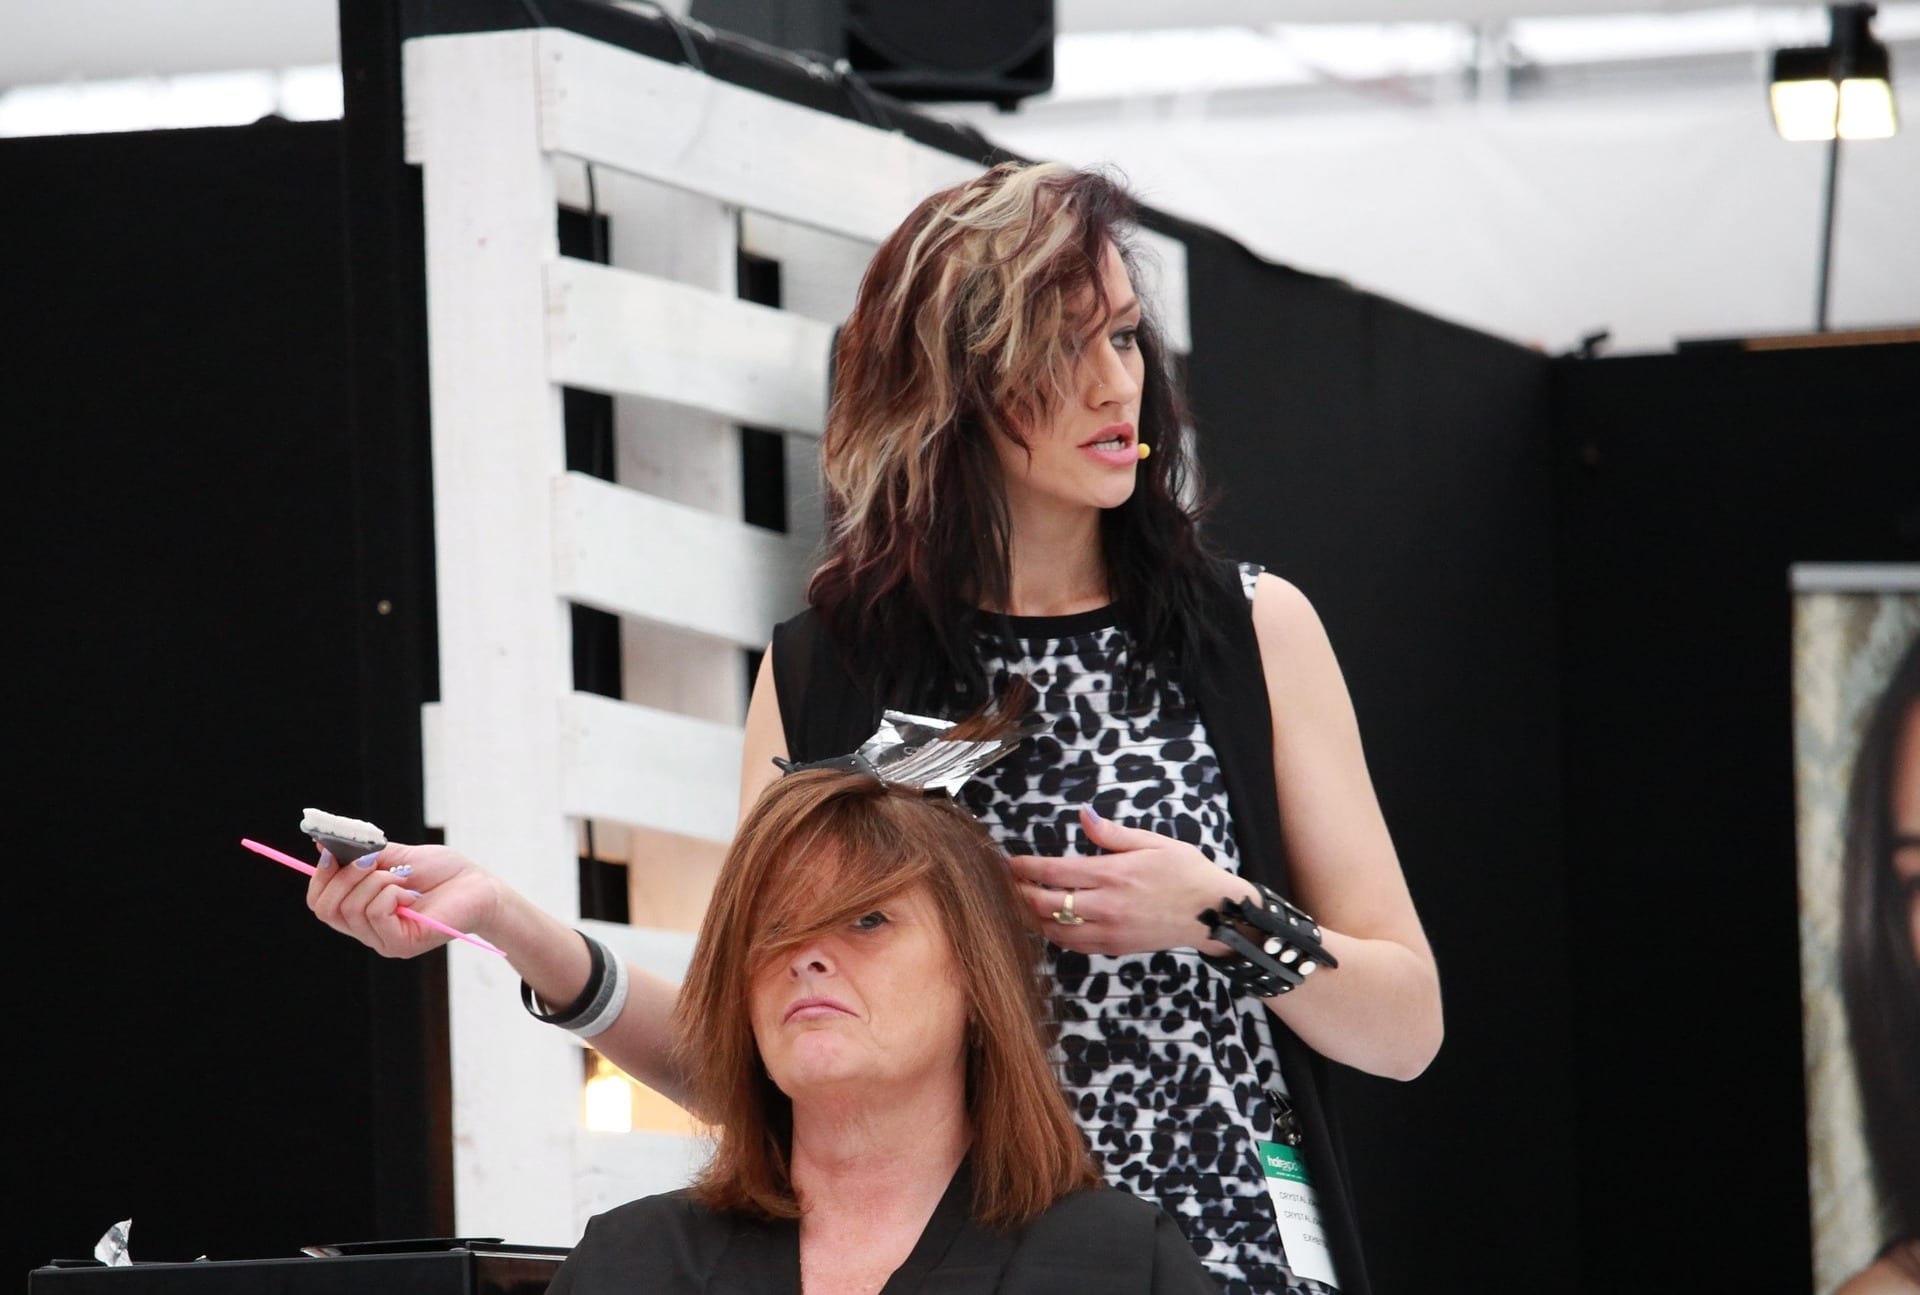 Advantages and disadvantages of being a hair stylist